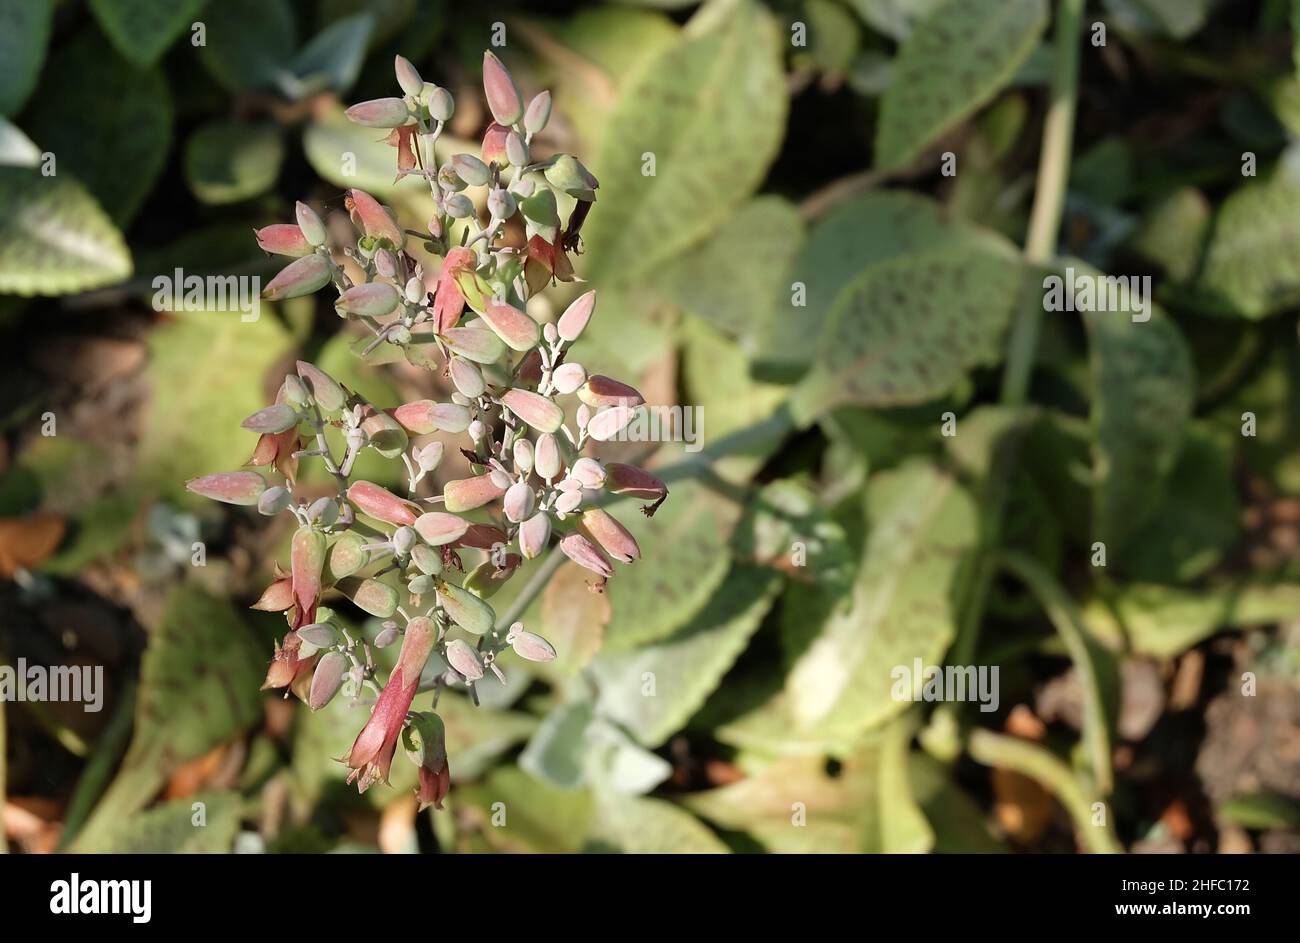 Kalanchoe Humilis or Desert Surprise Succulent Plant with Beautiful Flowers Blooming in A Garden. Stock Photo